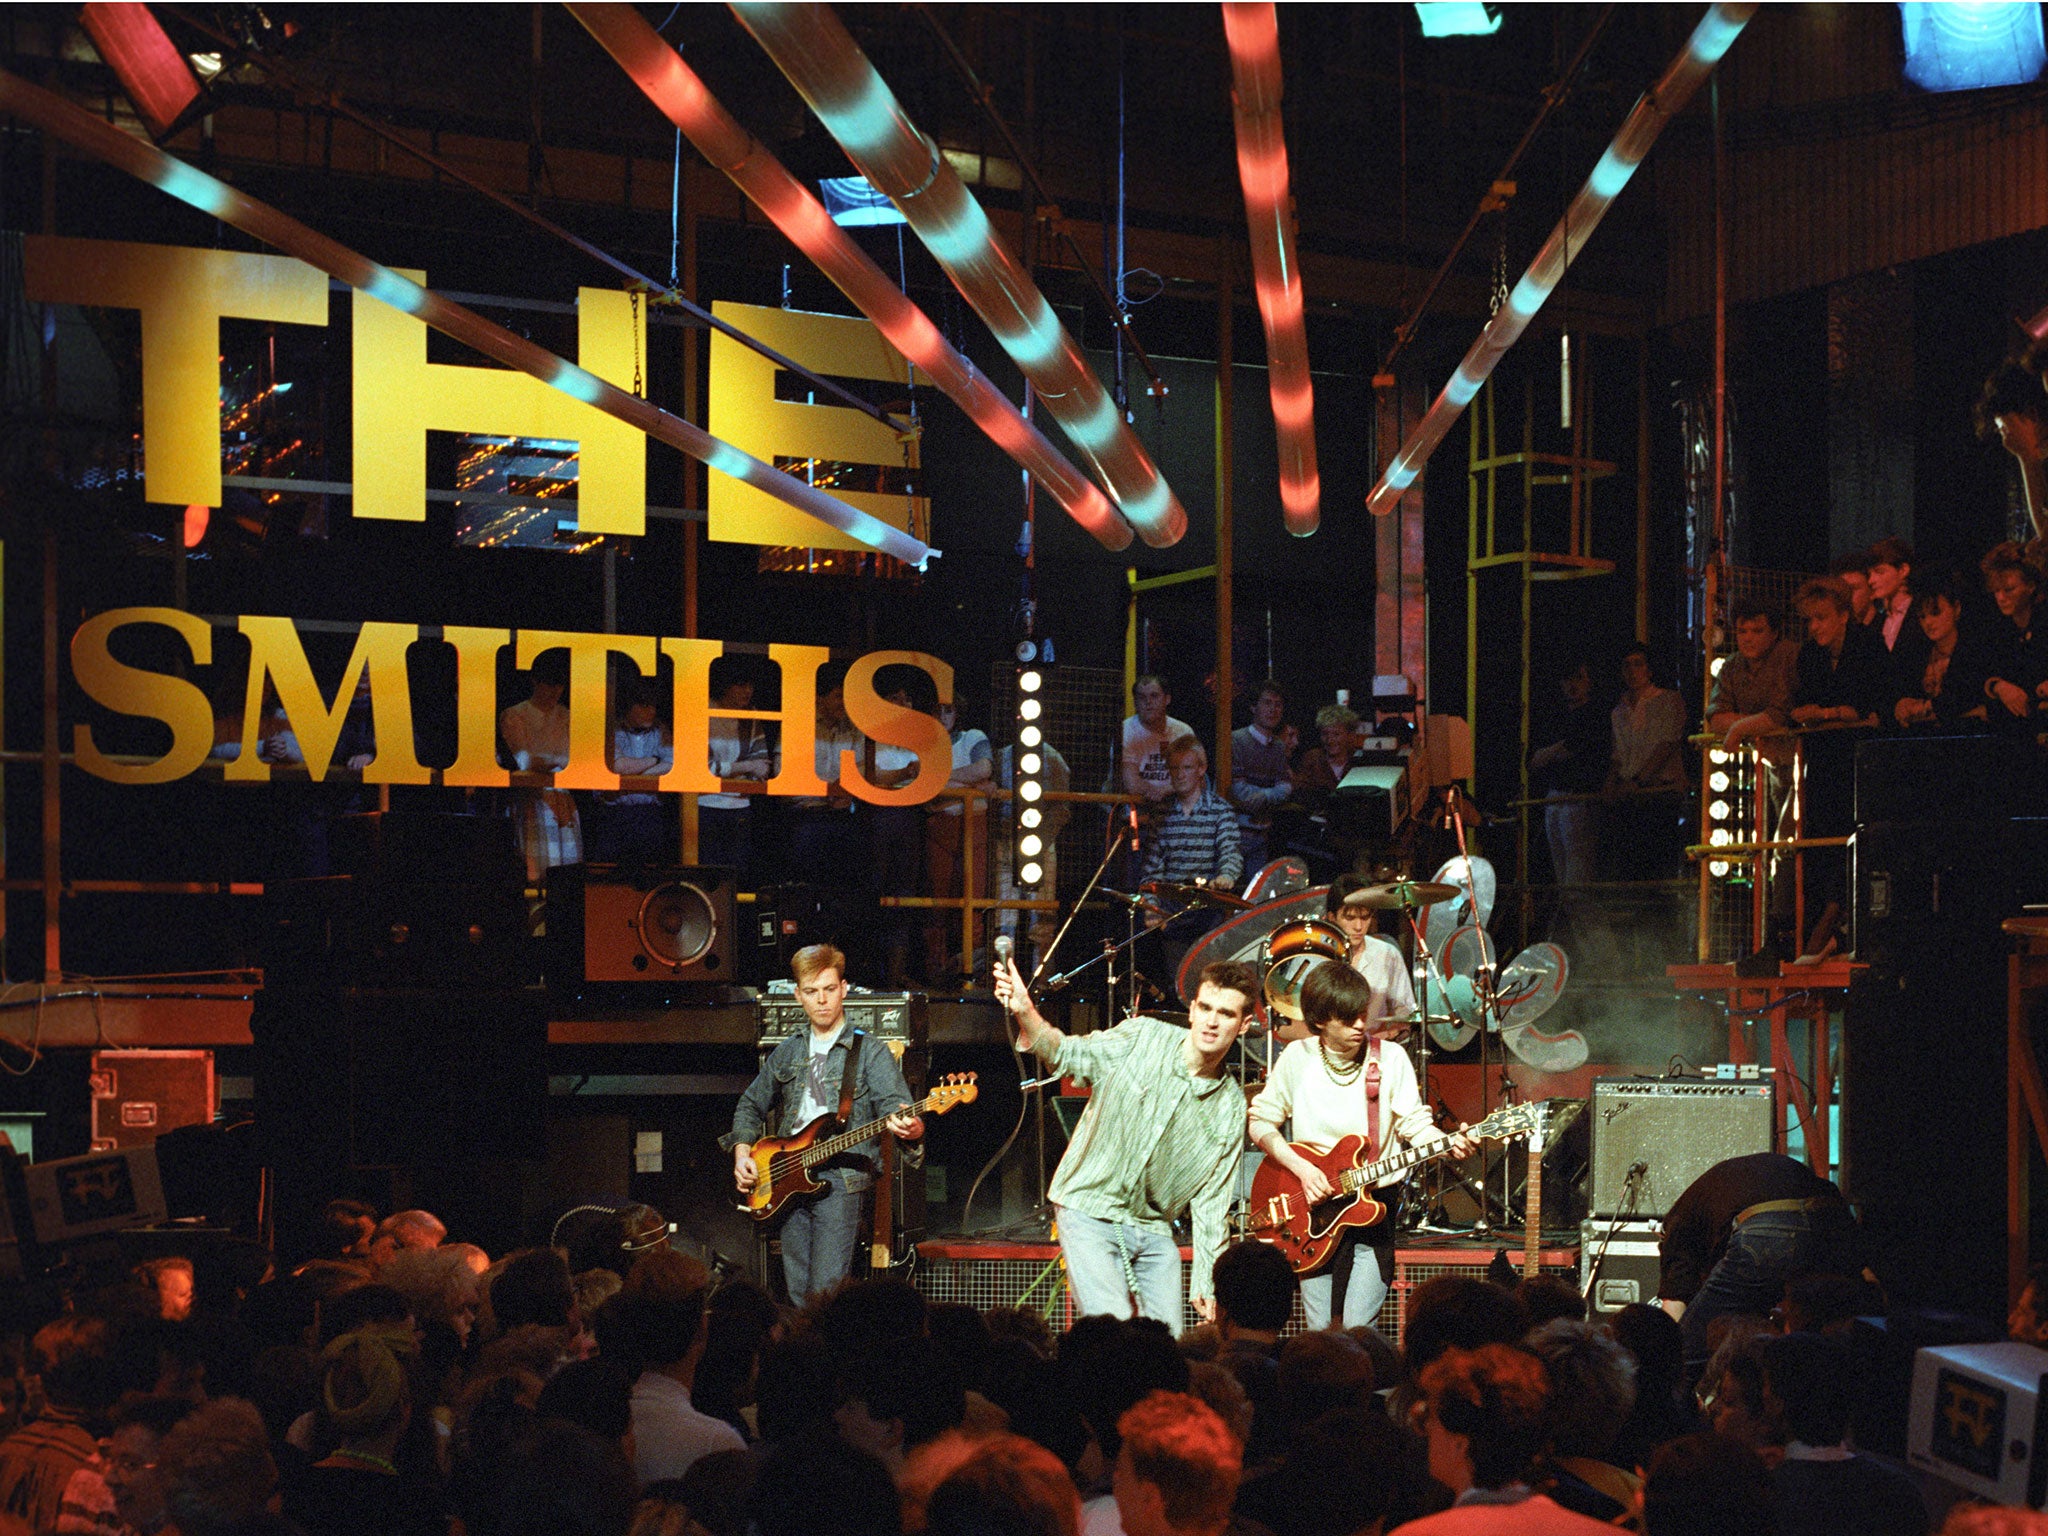 Seen live for the last time? The Smiths